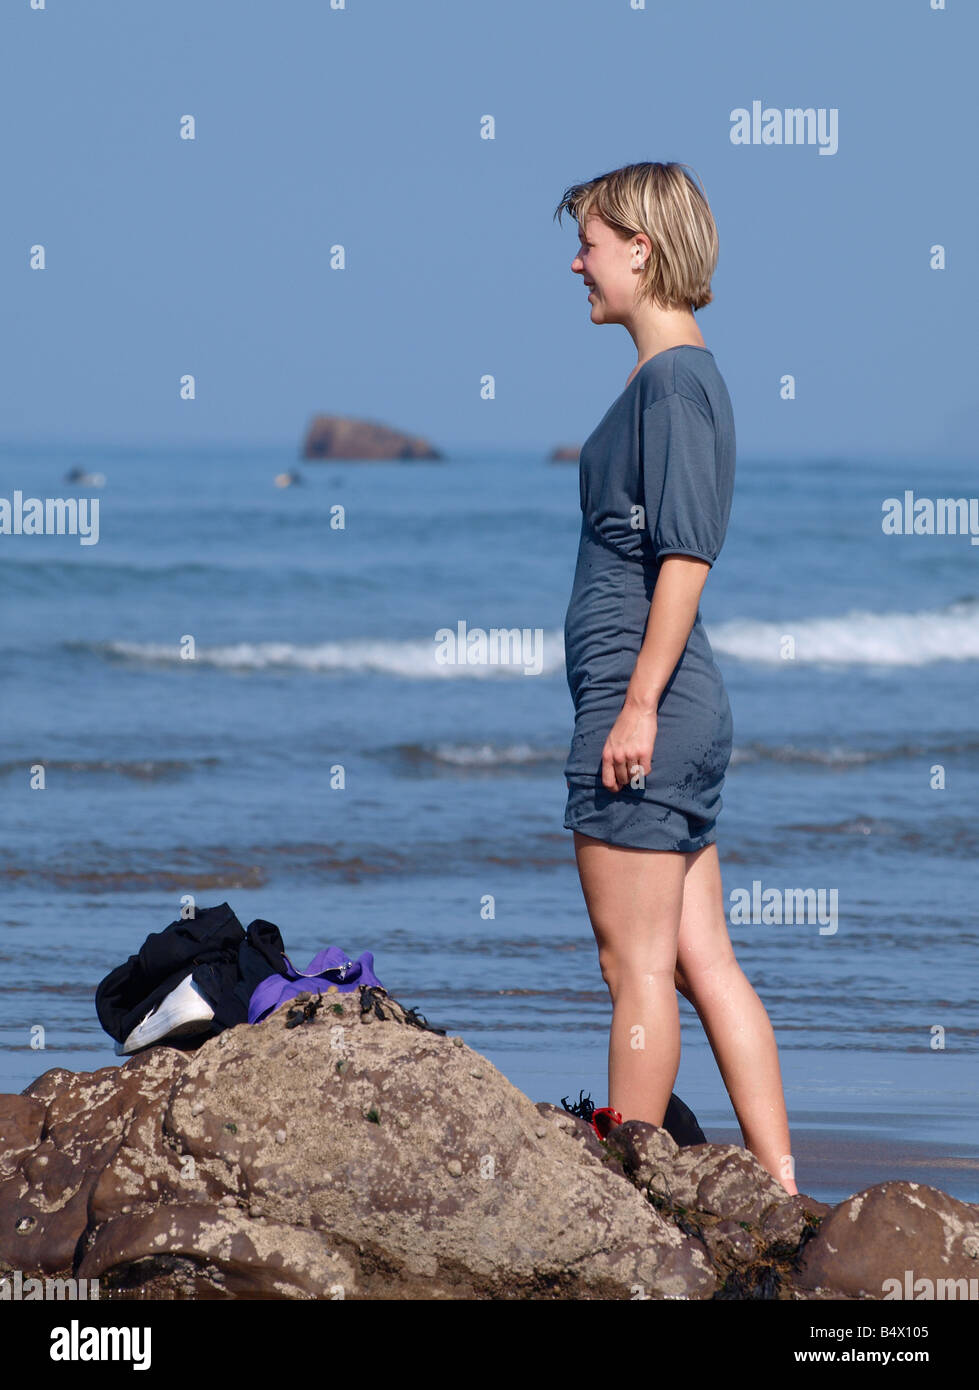 Young blonde woman standing on rocks looking out to sea Stock Photo